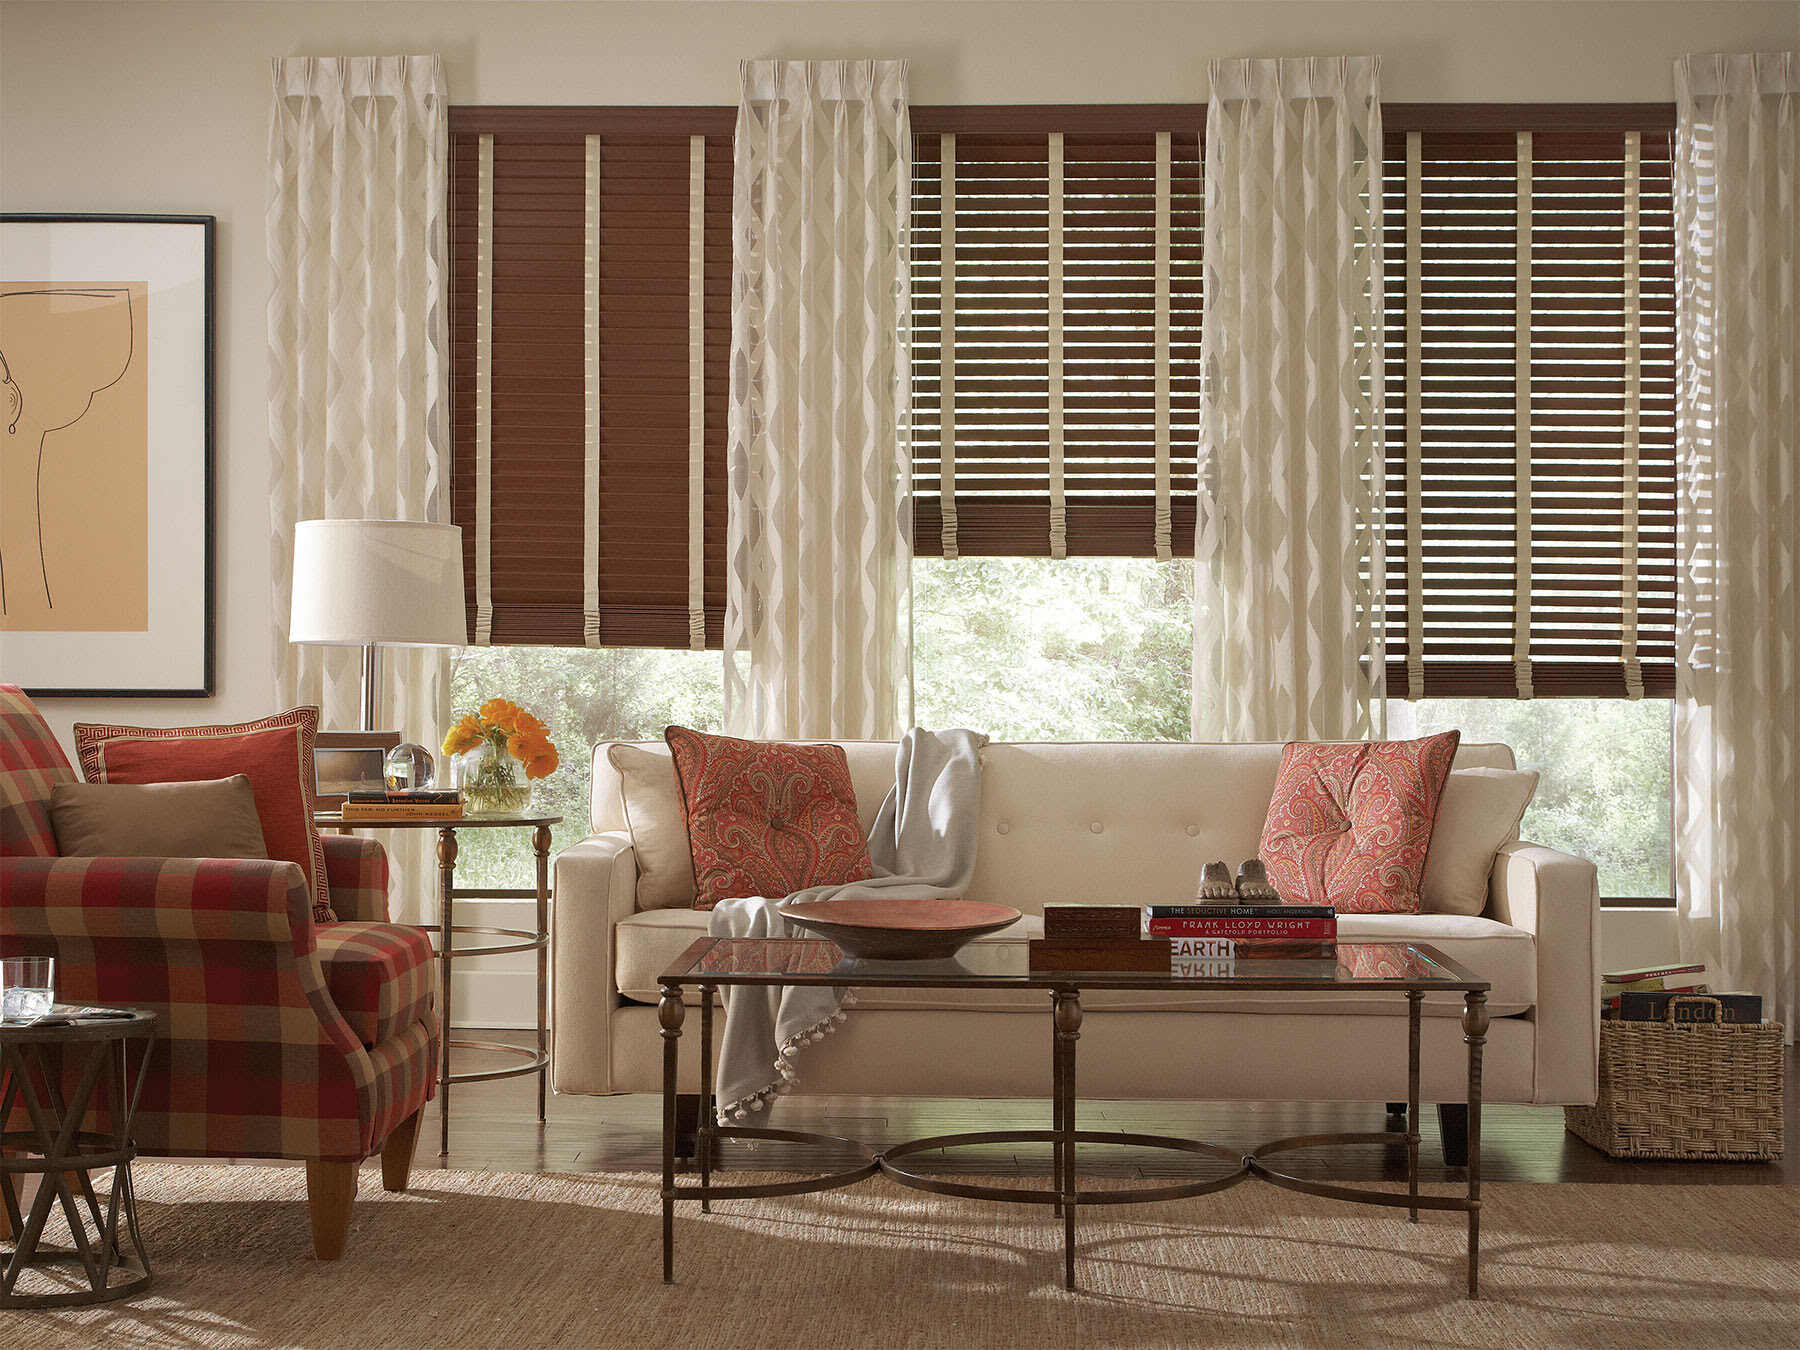 How To Take Down Wood Blinds